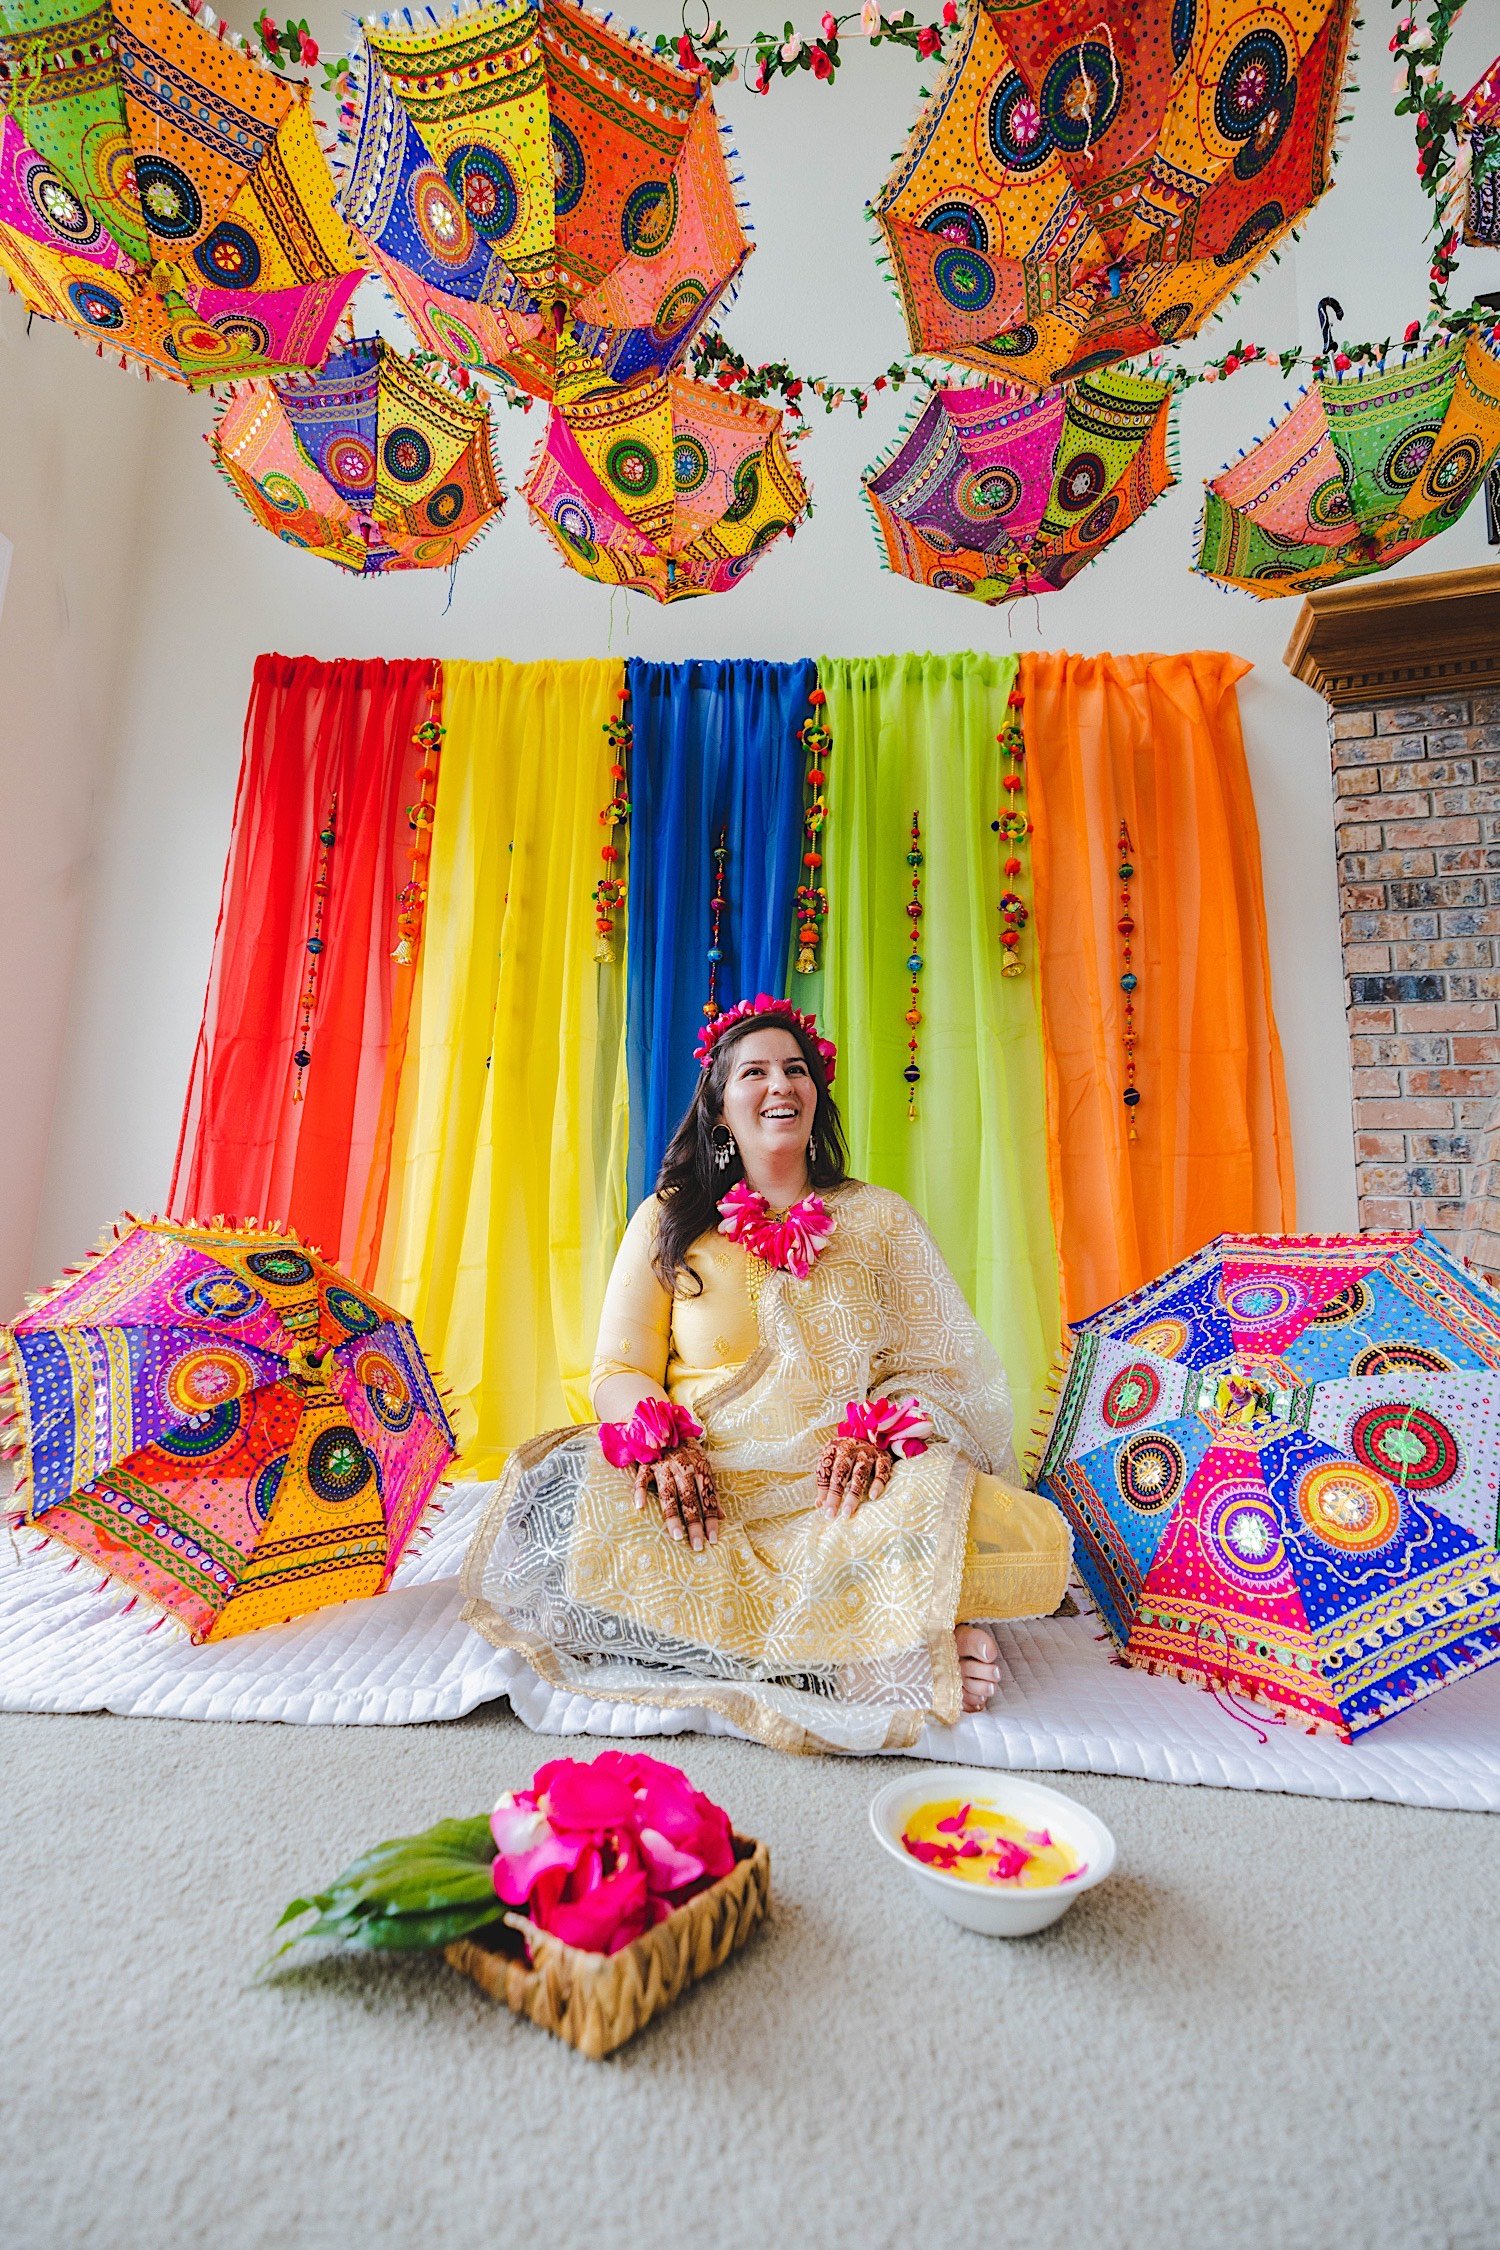 Bride to be sits in front of multicolored backdrop and colorful umbrellas before traditional Haldi celebration